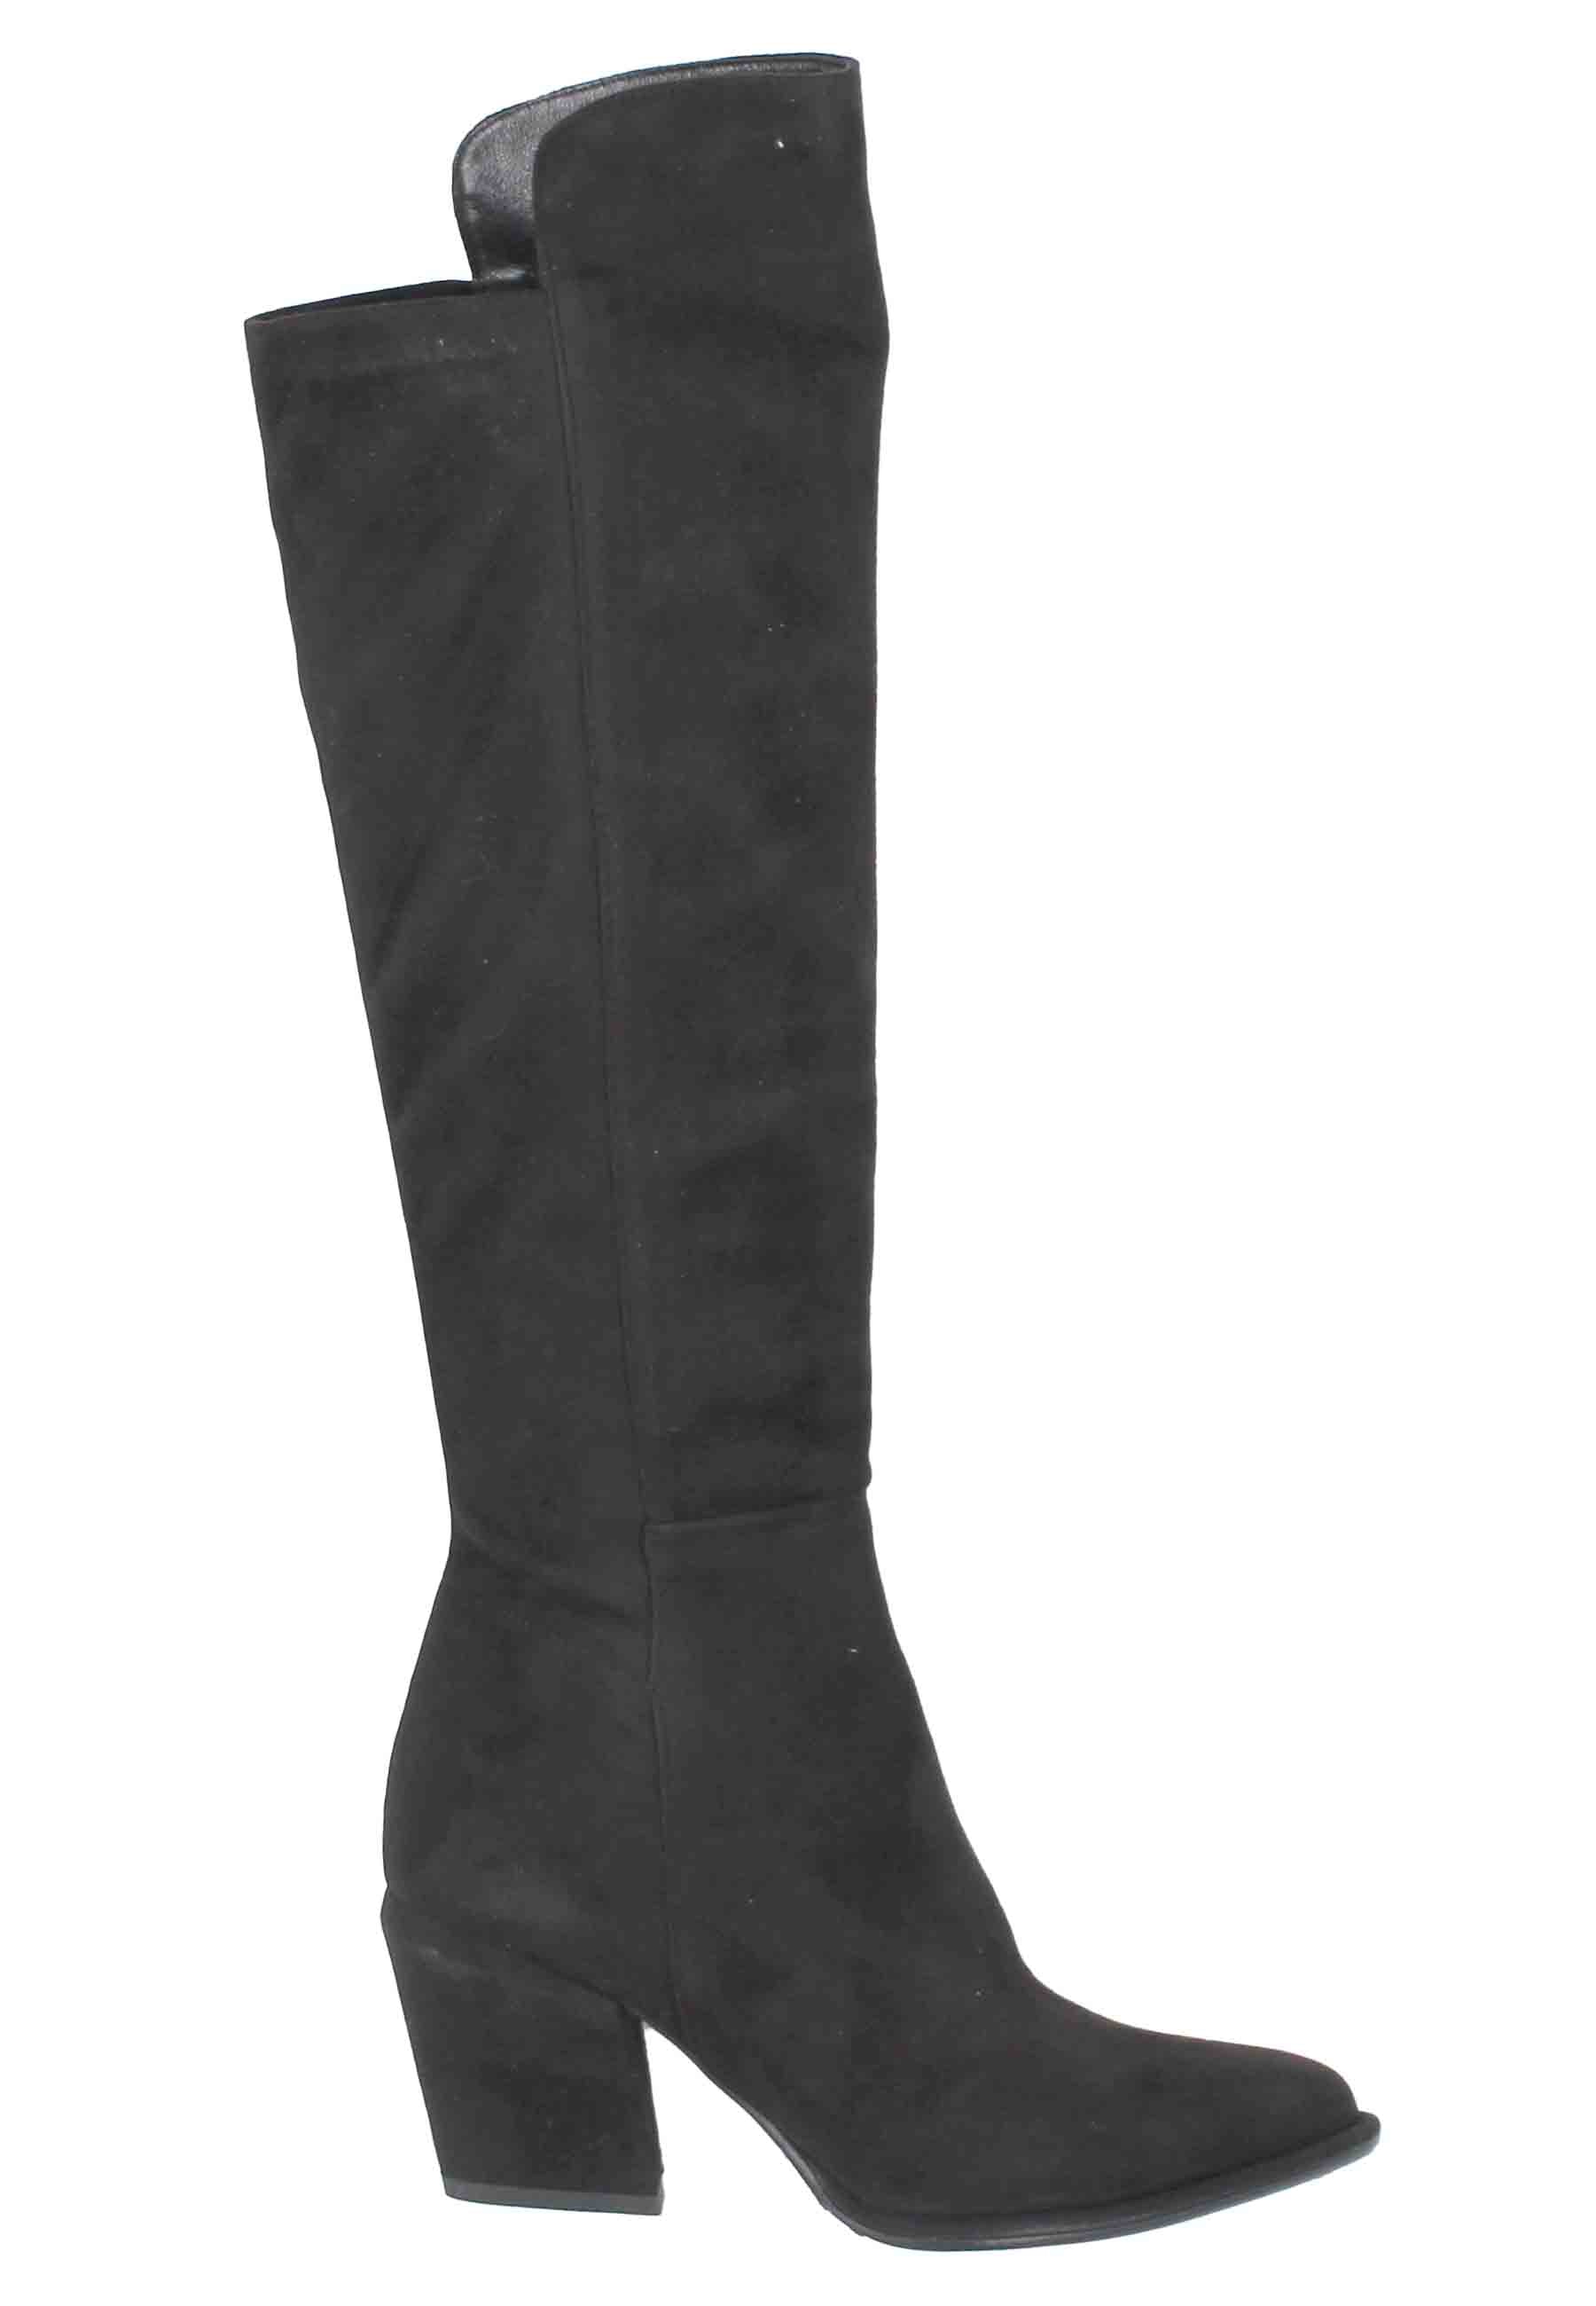 Women's boots in black stretch eco suede